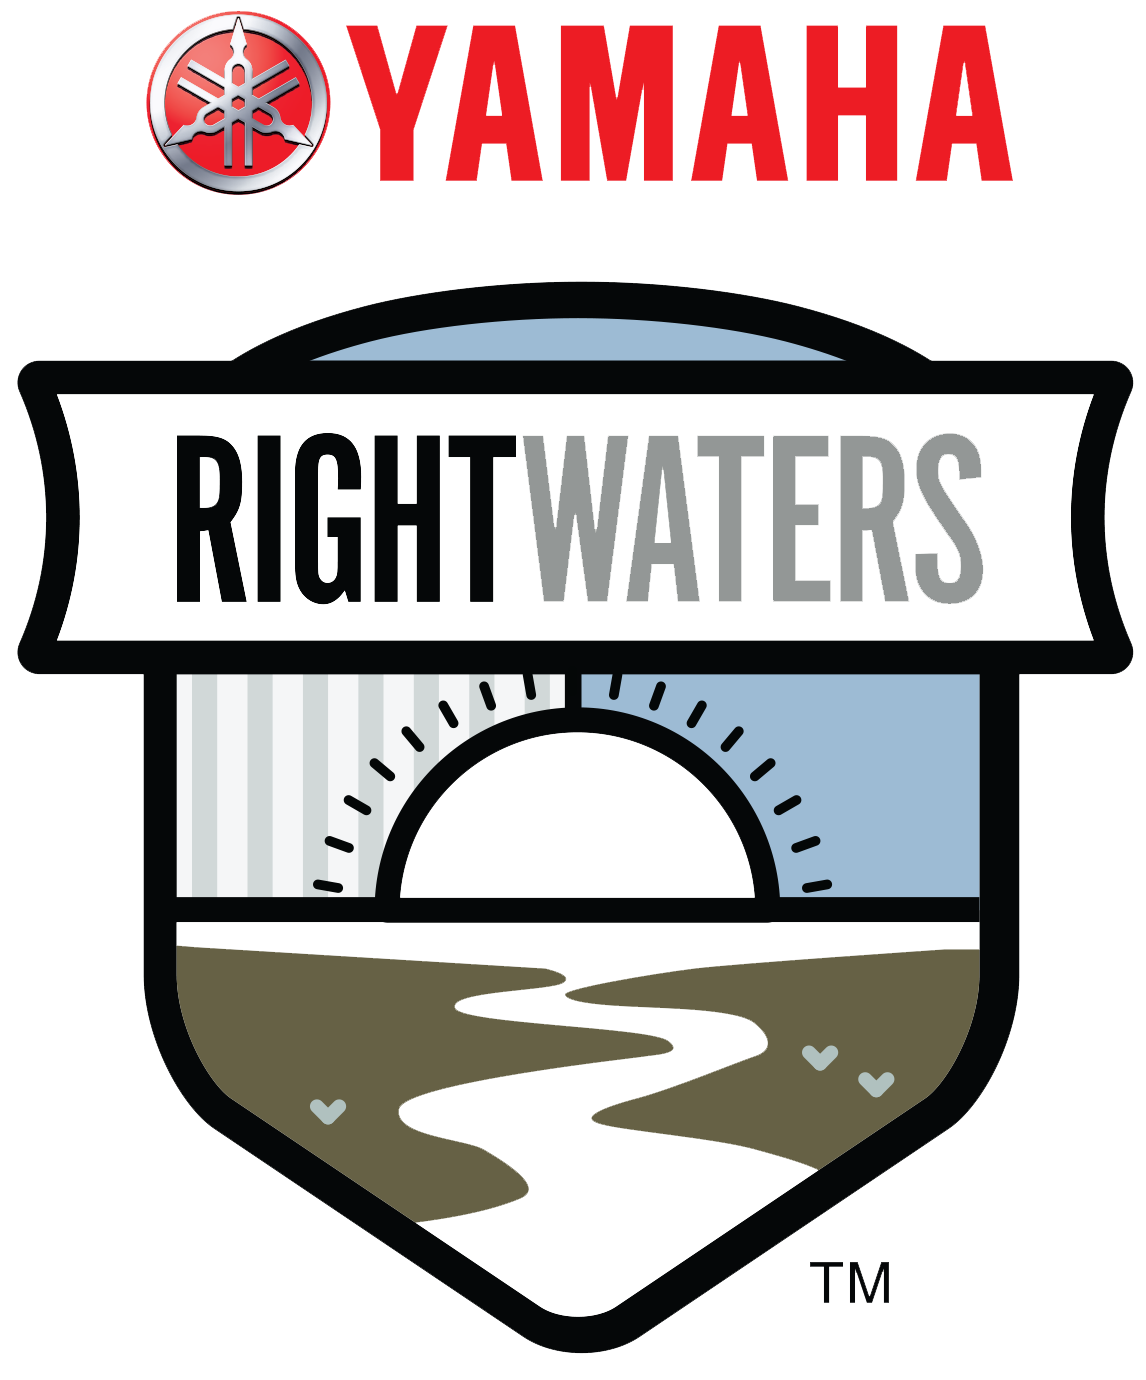 RIGHTWATERS LOGO.png